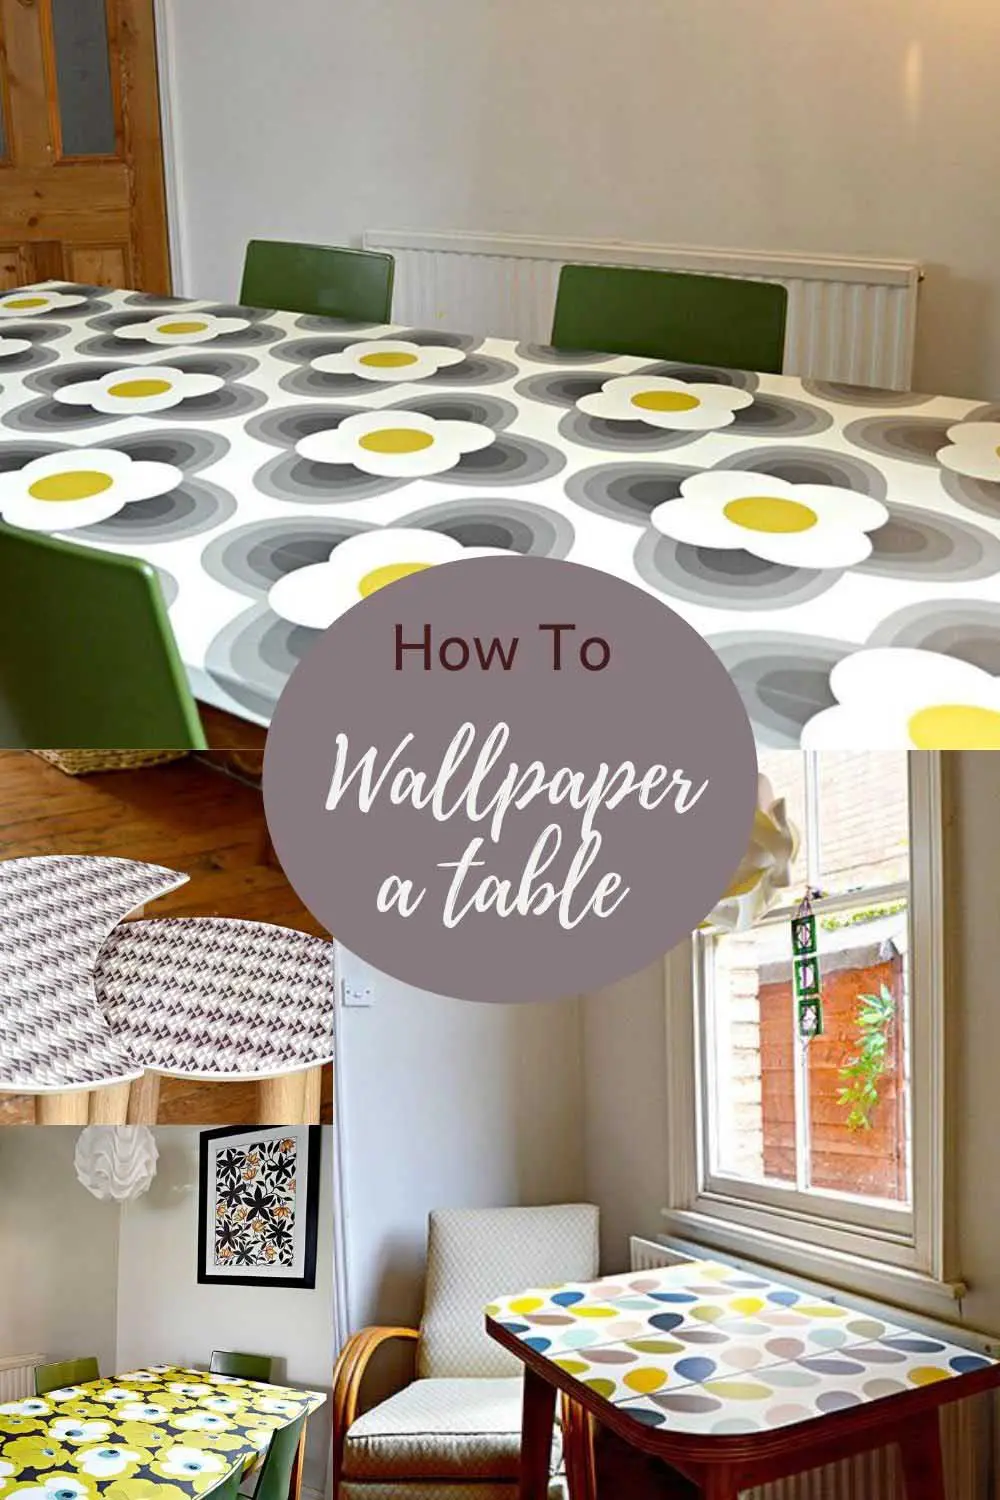 How to decoupage tabletop with wallpaper